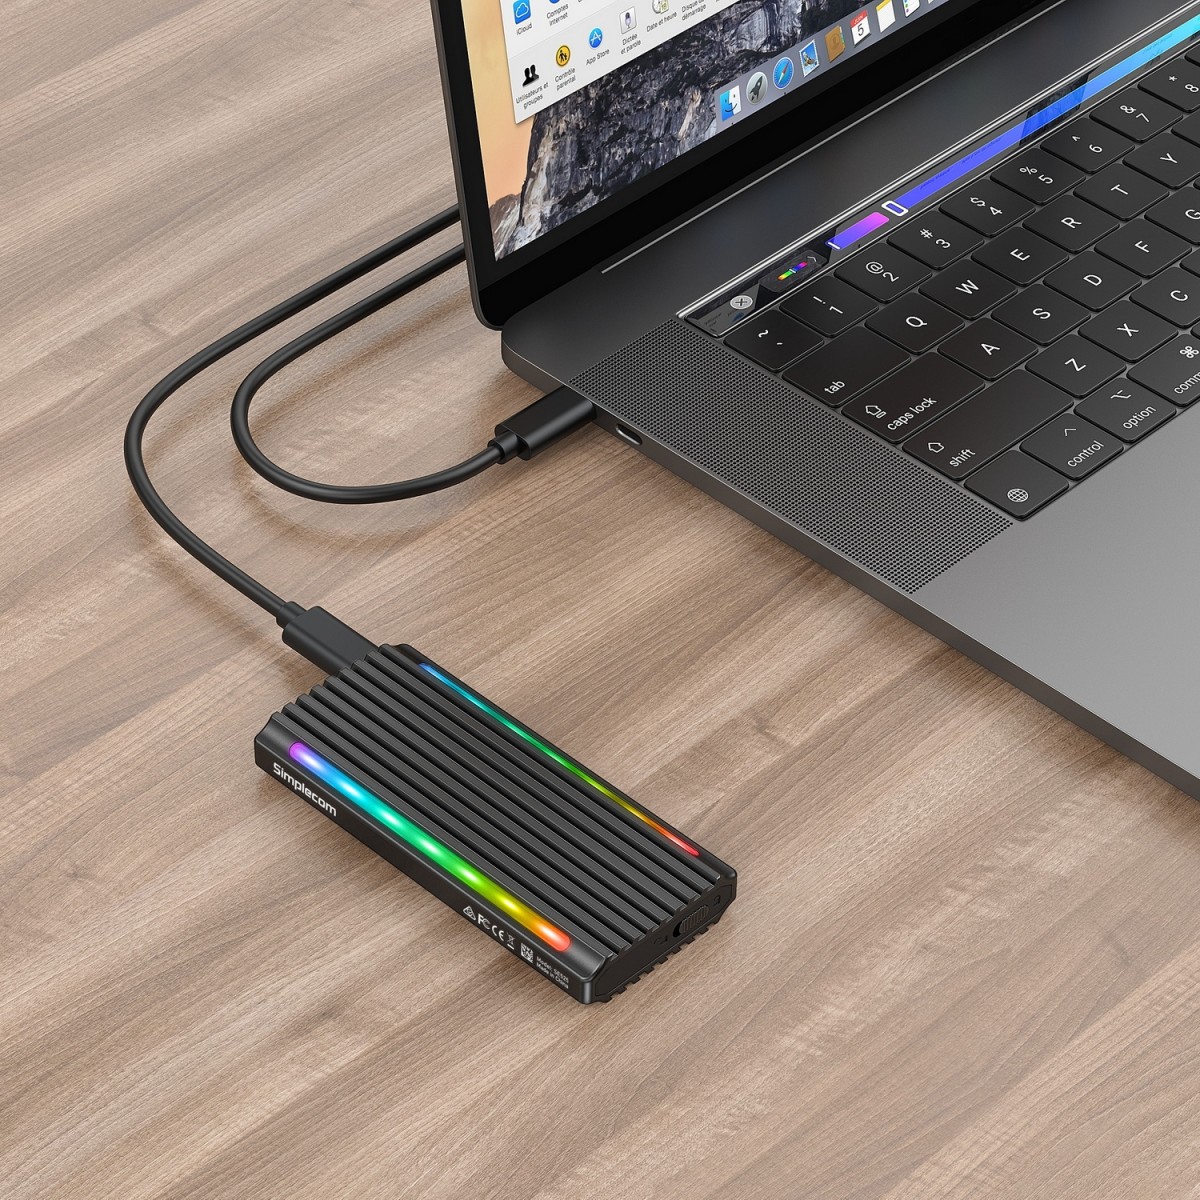 A large marketing image providing additional information about the product Simplecom SE525 NVMe / SATA M.2 SSD USB-C Enclosure with RGB Light USB 3.2 Gen 2 10Gbps - Additional alt info not provided